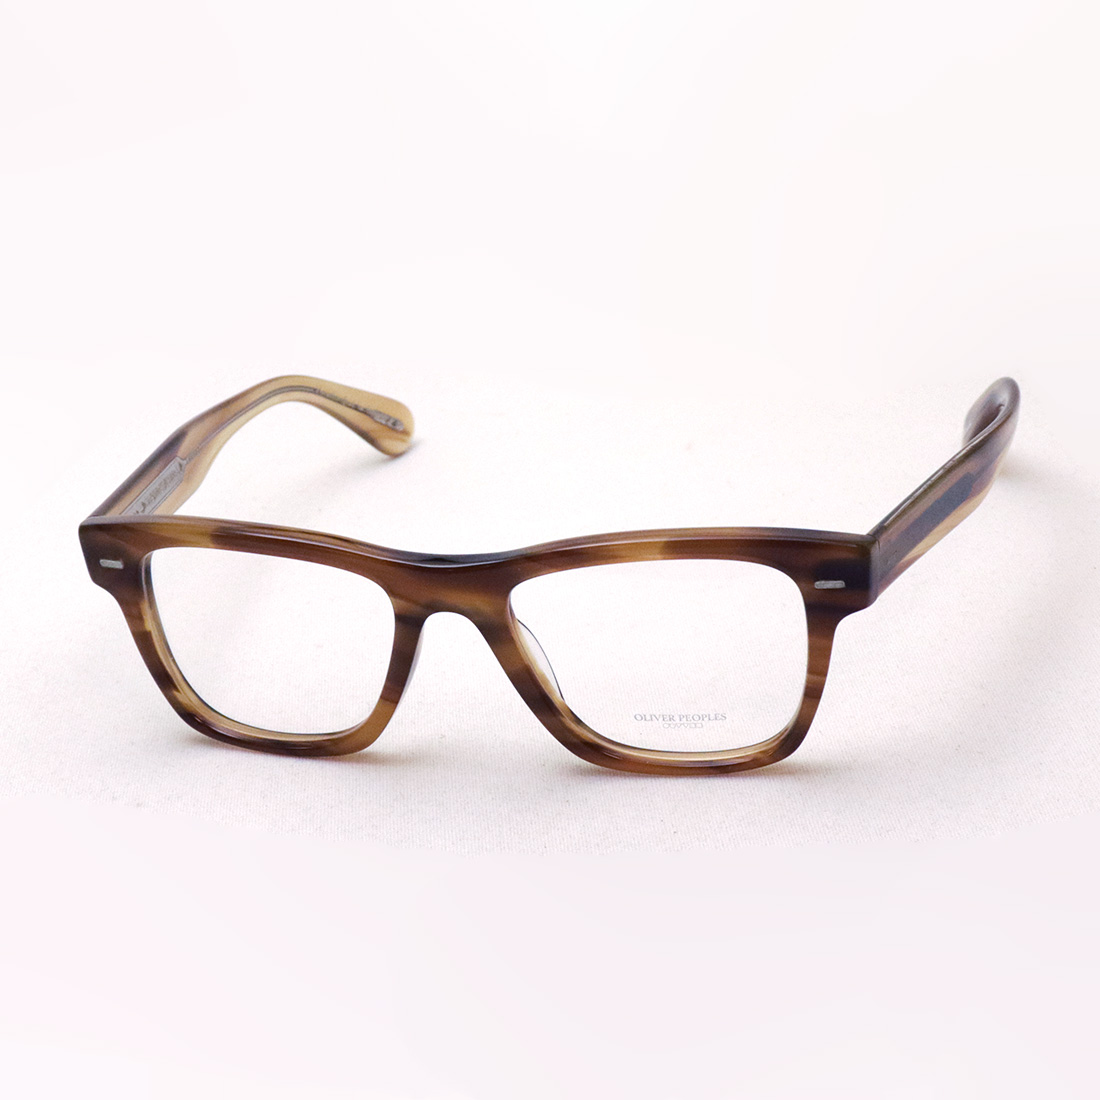 OLIVER PEOPLES OV5393F 1011 51 Oliver 伊達メガネ 度付き ブルー